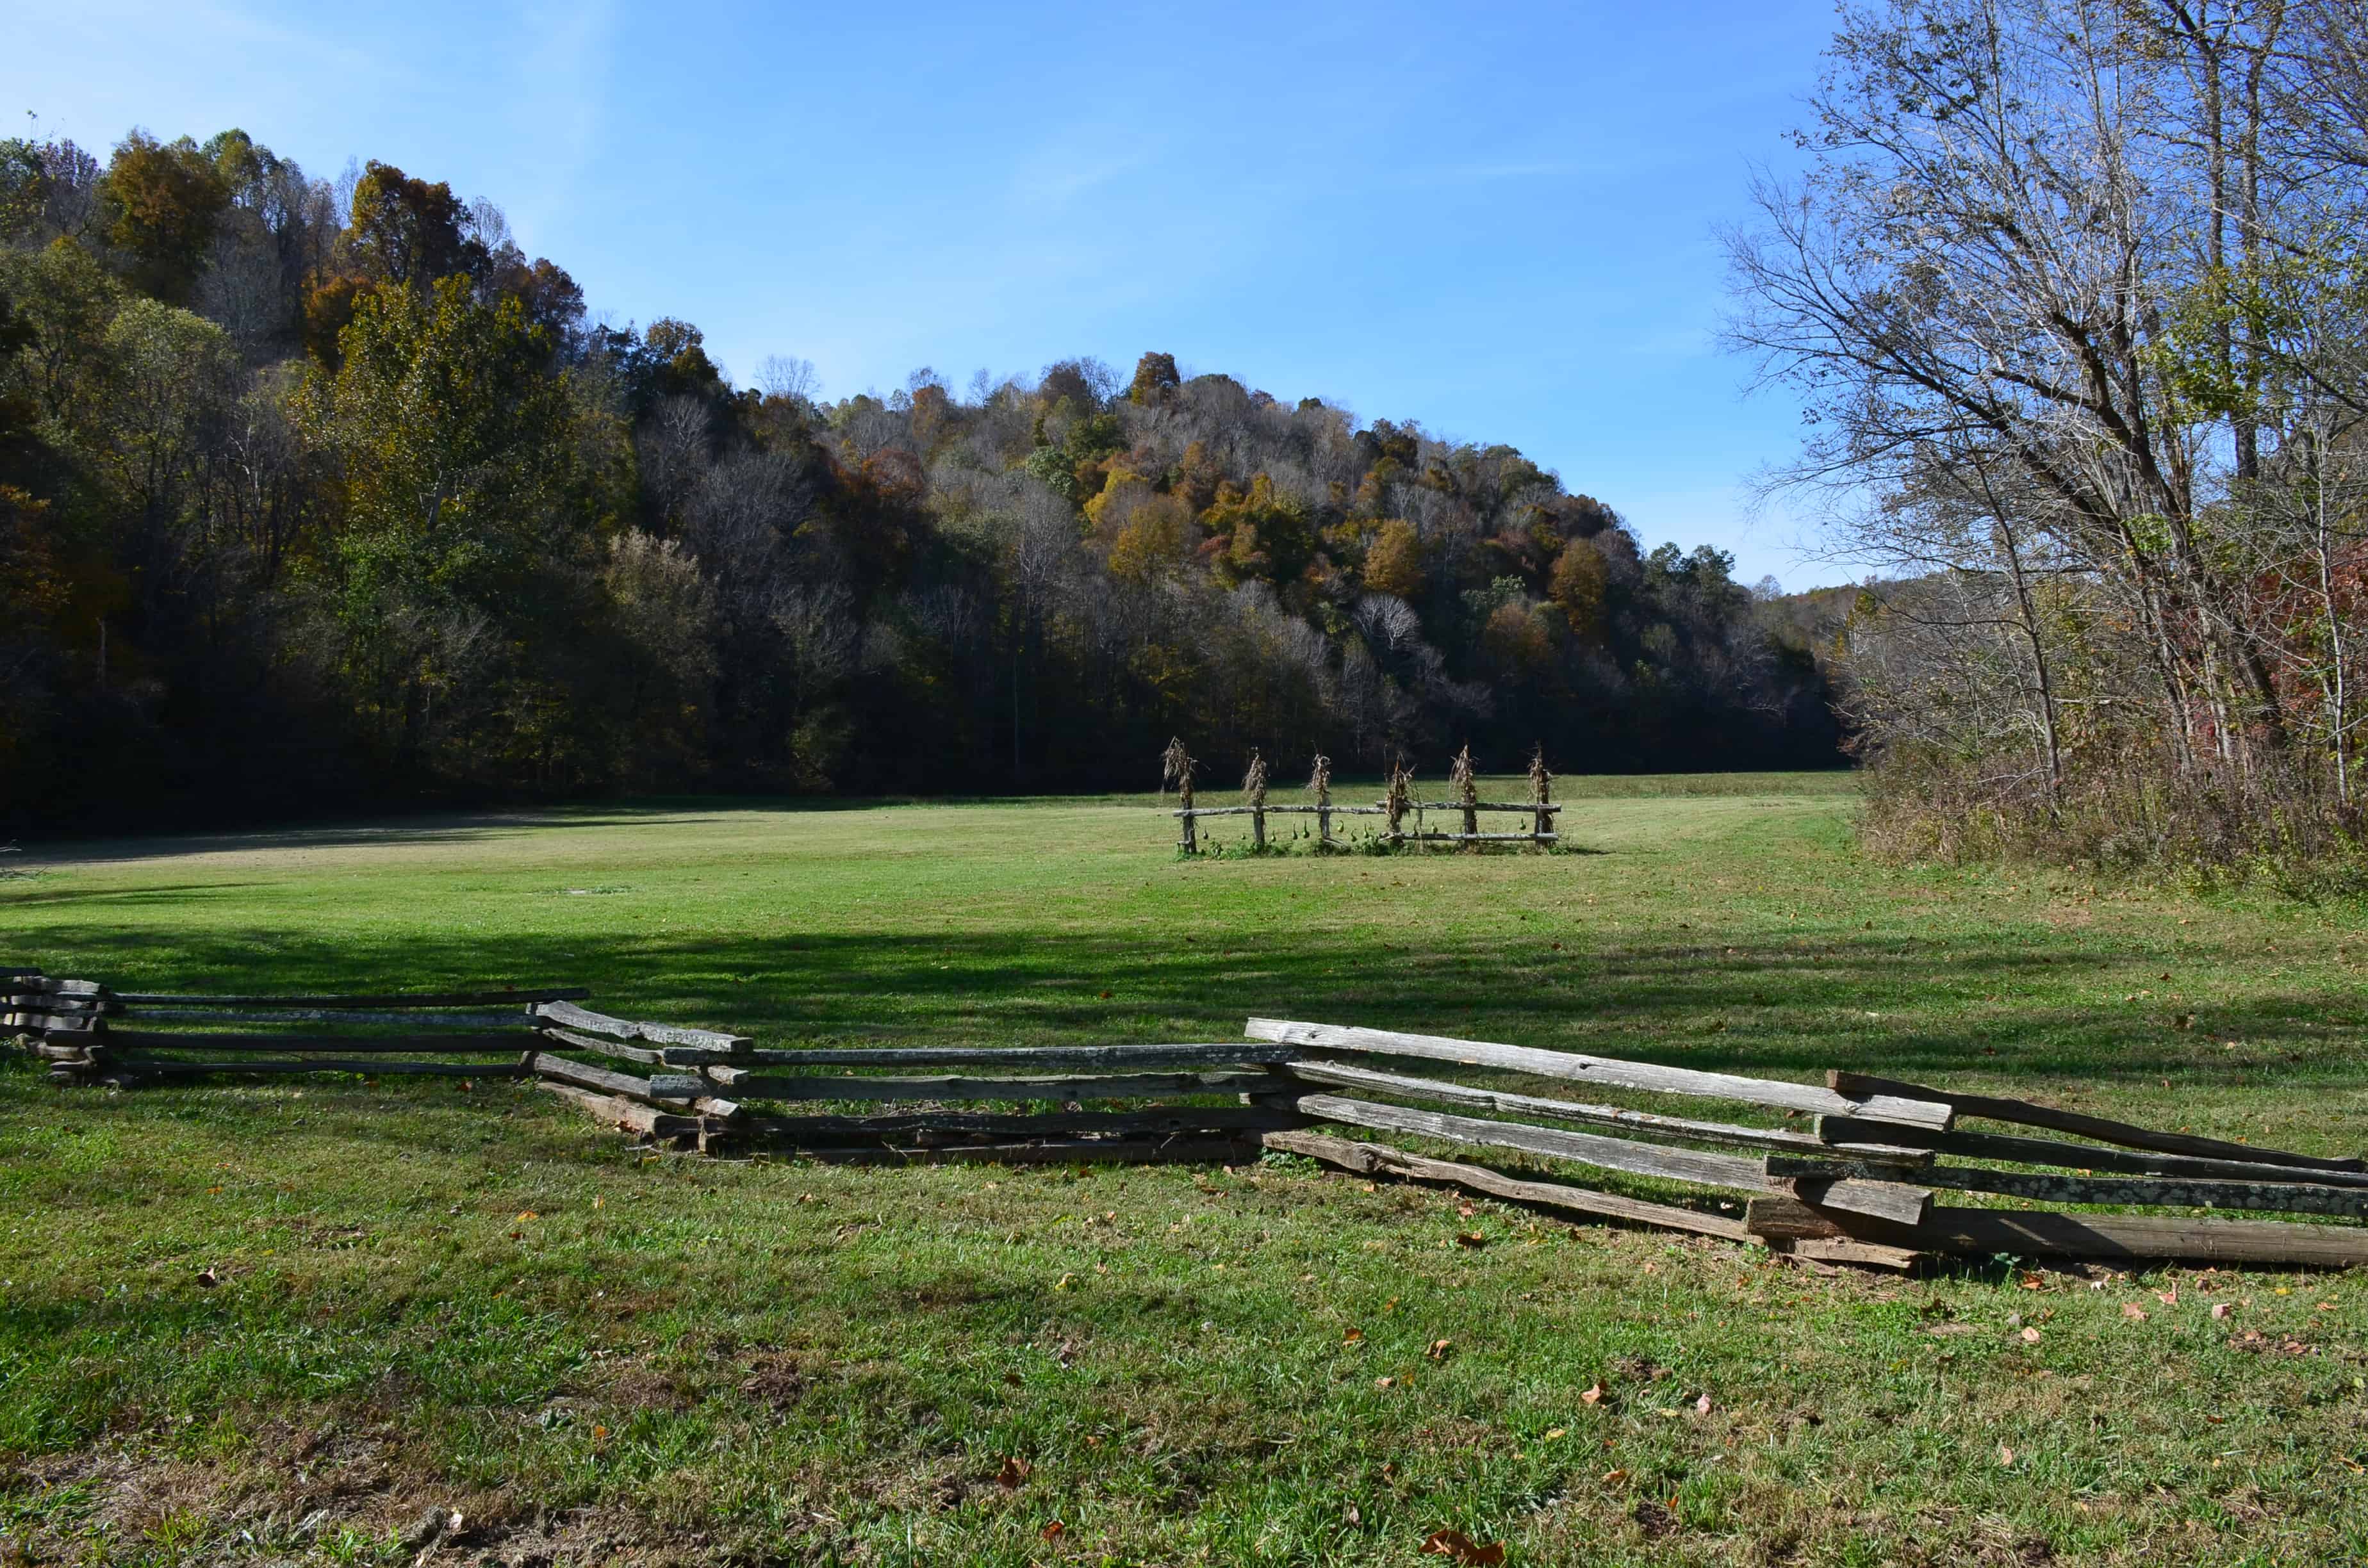 View of Knob Creek Farm at Abraham Lincoln Birthplace National Historical Park in Kentucky